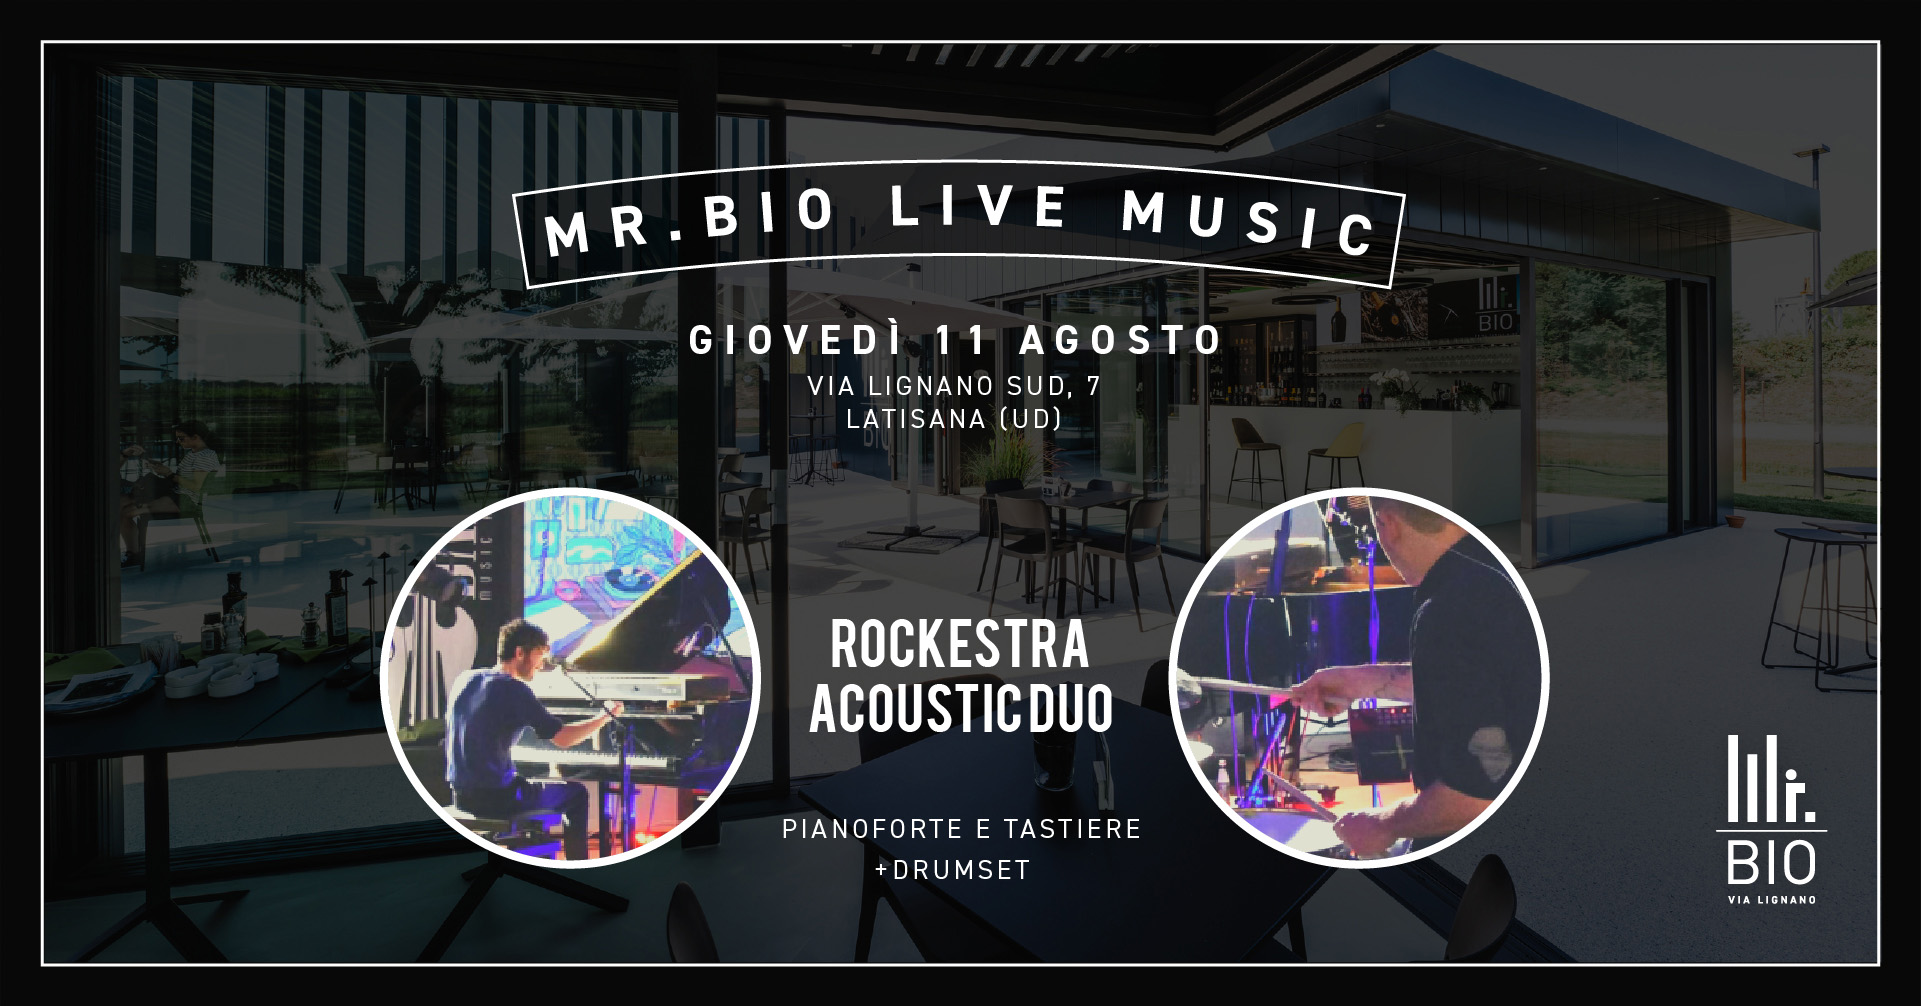 LIVE MUSIC - ROCKESTRA ACOUSTIC DUO